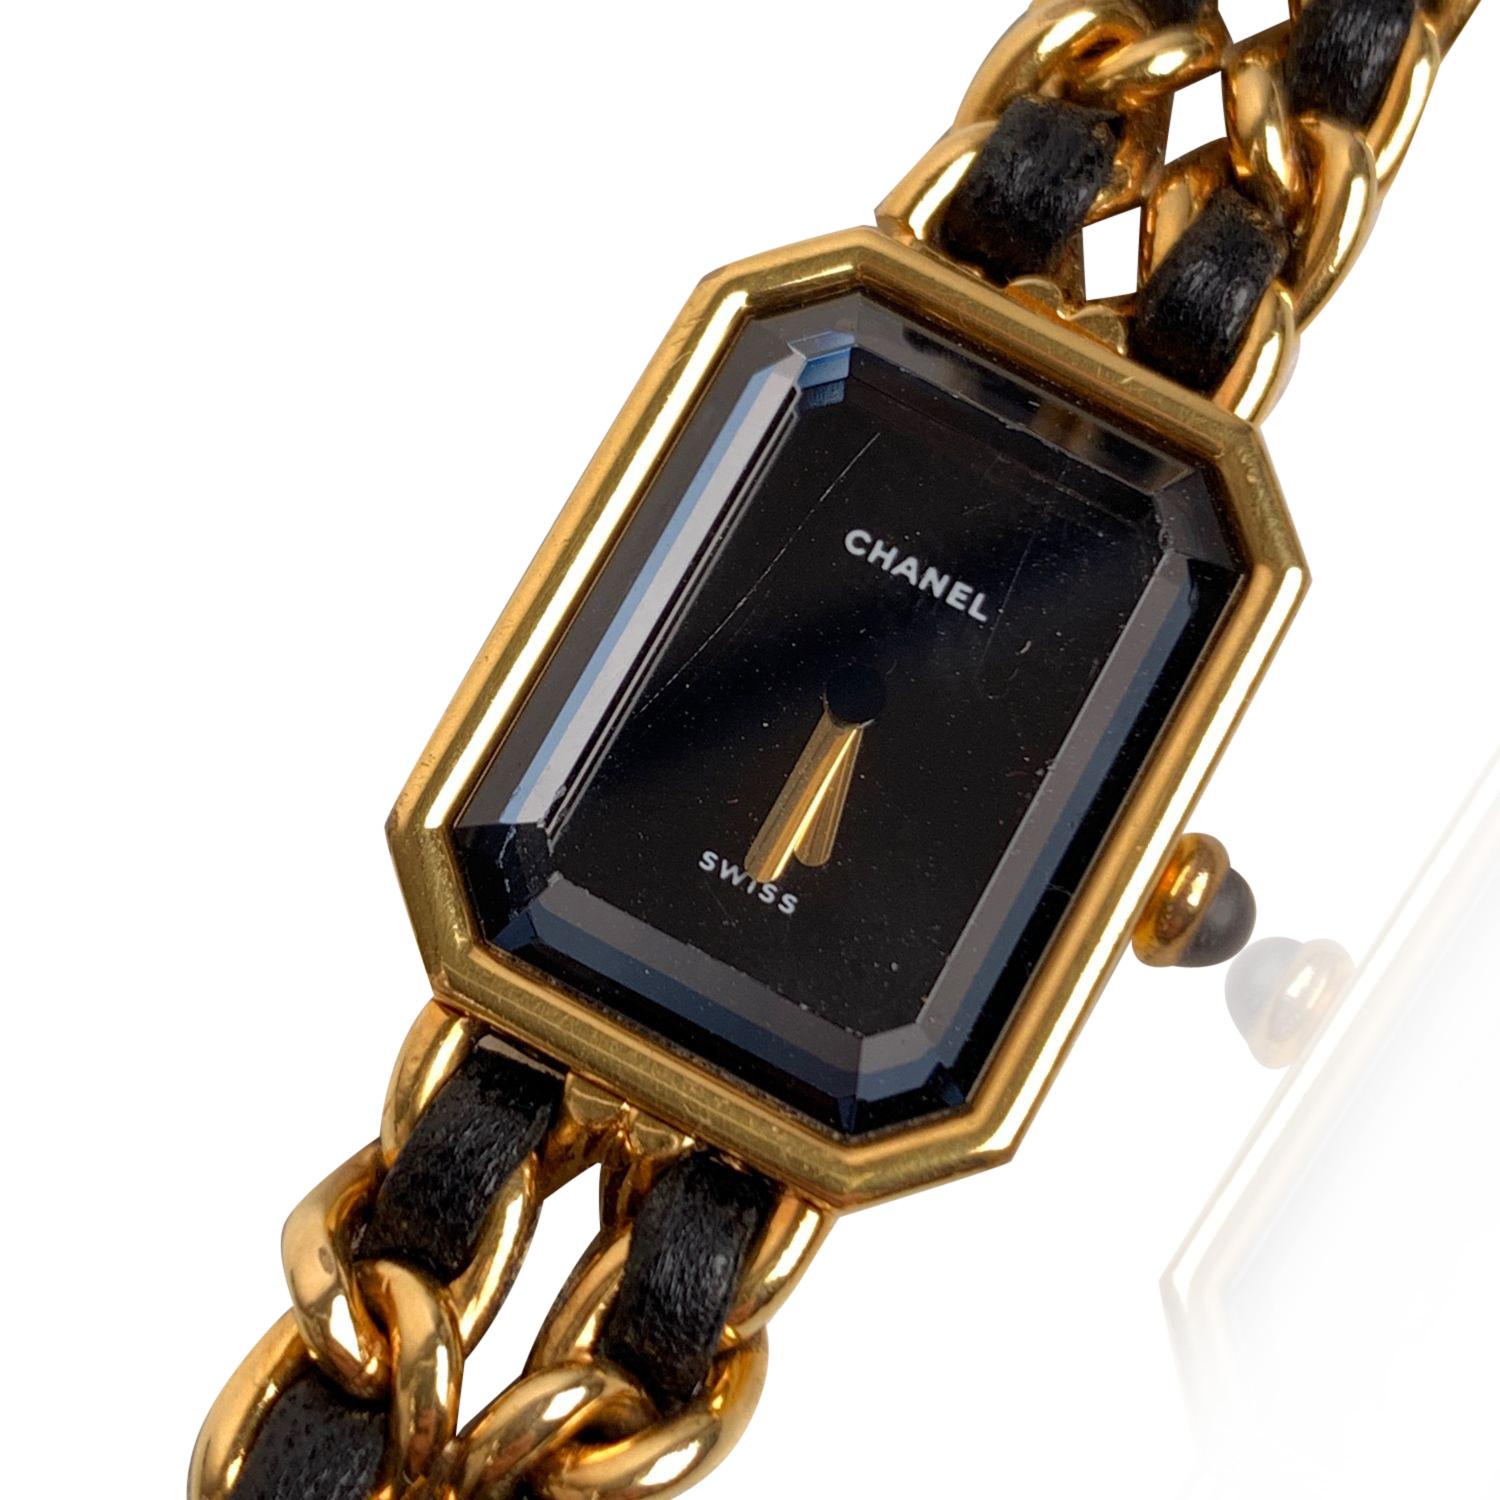 Beautiful Chanel 'Première' watch. This was the first wristwatch created by maison Chanel in 1987. The watch is made from gold-plated stainless steel and it features an iconic chain-link bracelet with interwoven leather. Octagonal case. Black dial.